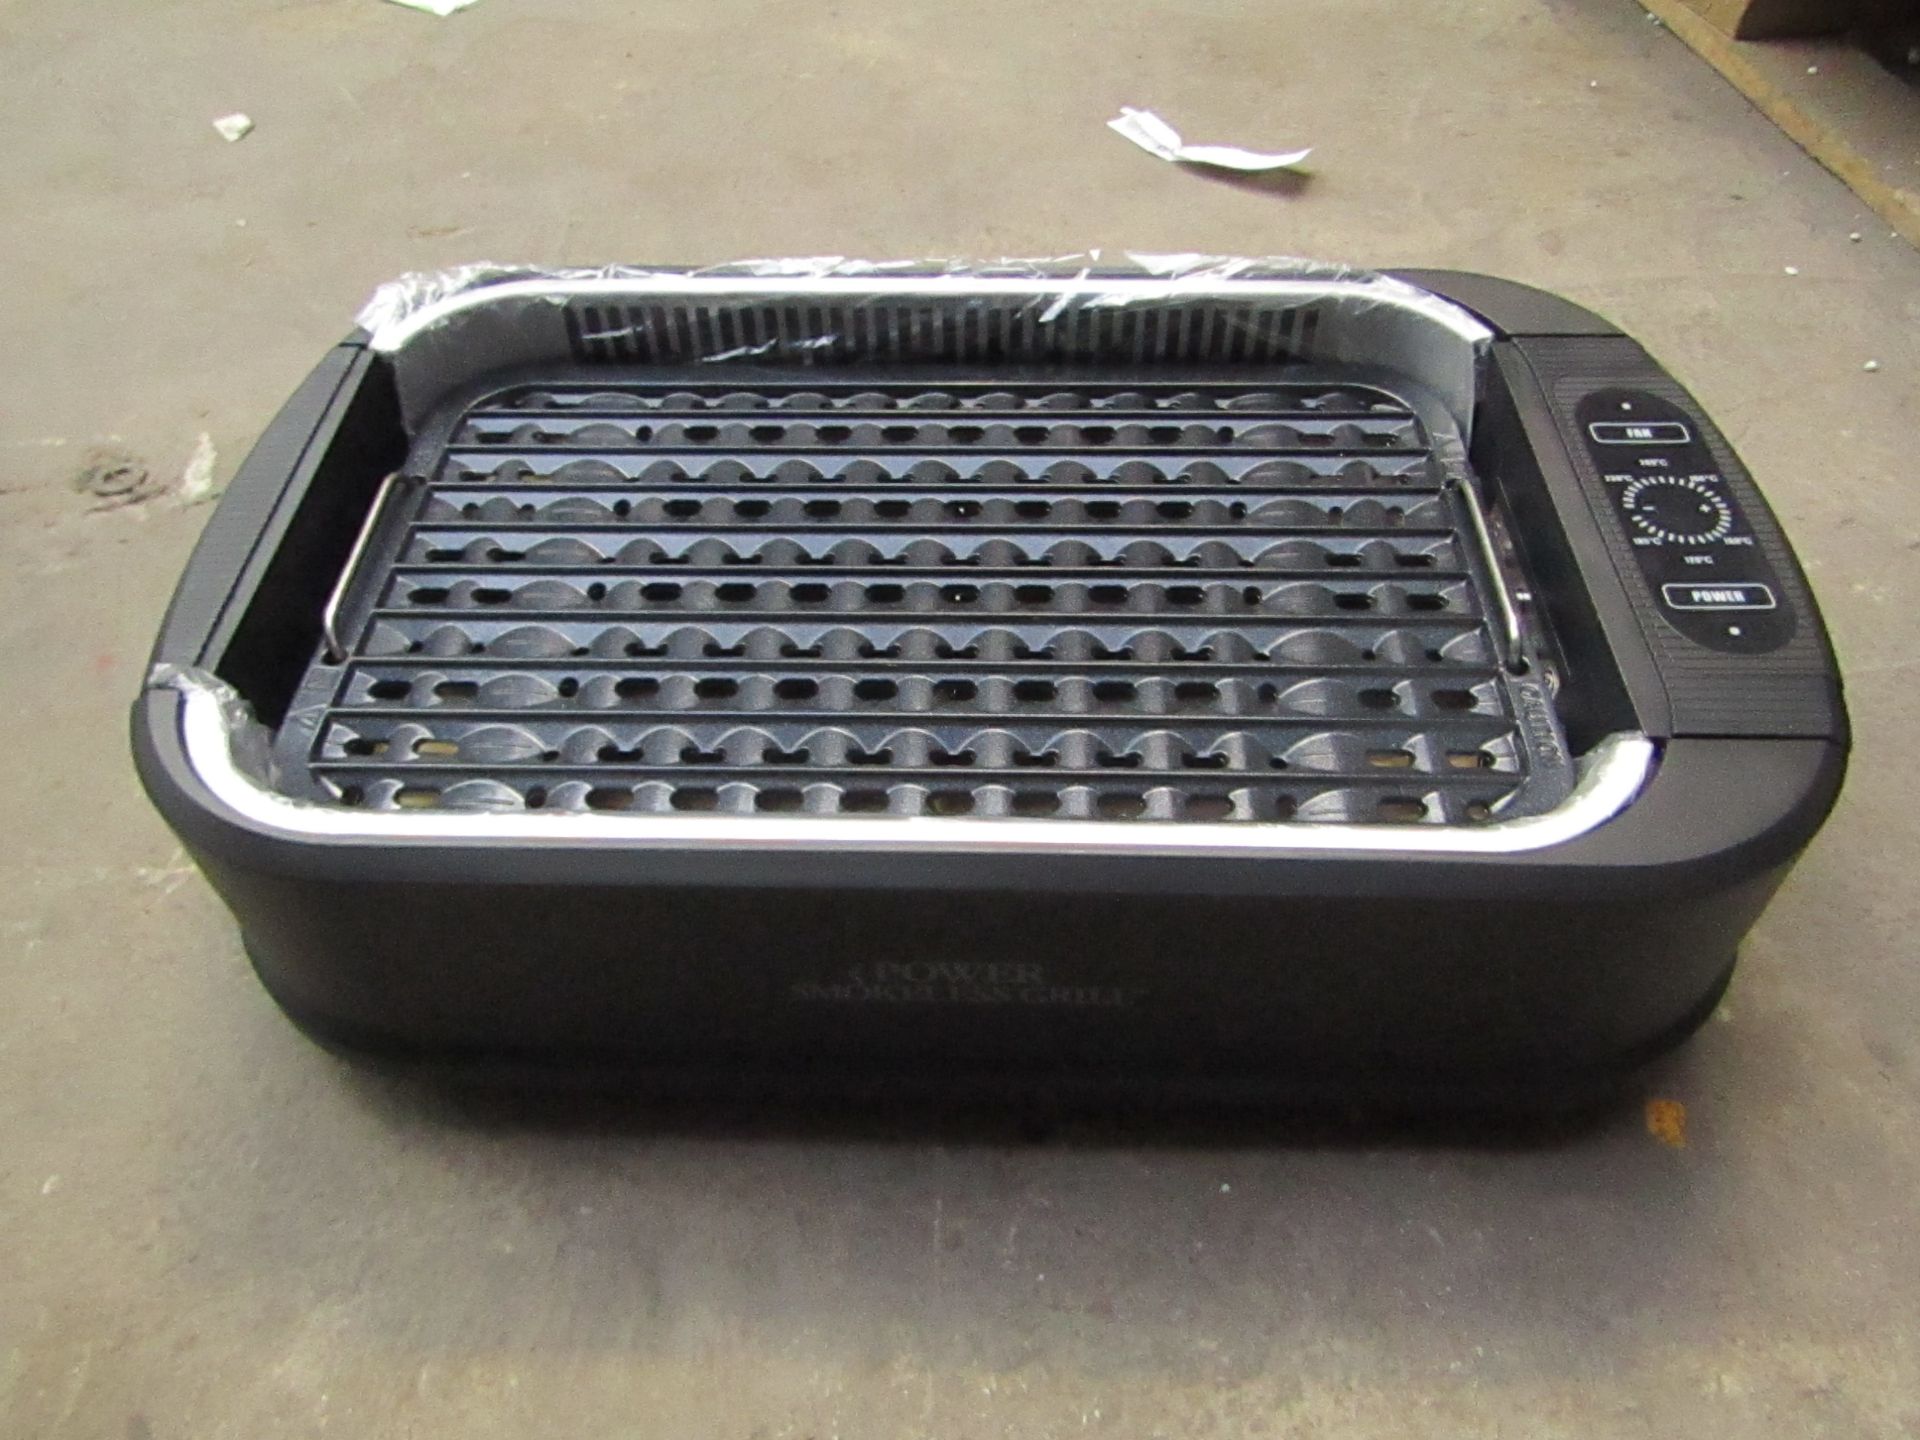 | 1X | POWER SMOKELESS GRILL BASIC | THIS ITEM HAS BEEN PROFESSIONALLY REFURBISHED AND REBOXED | RRP